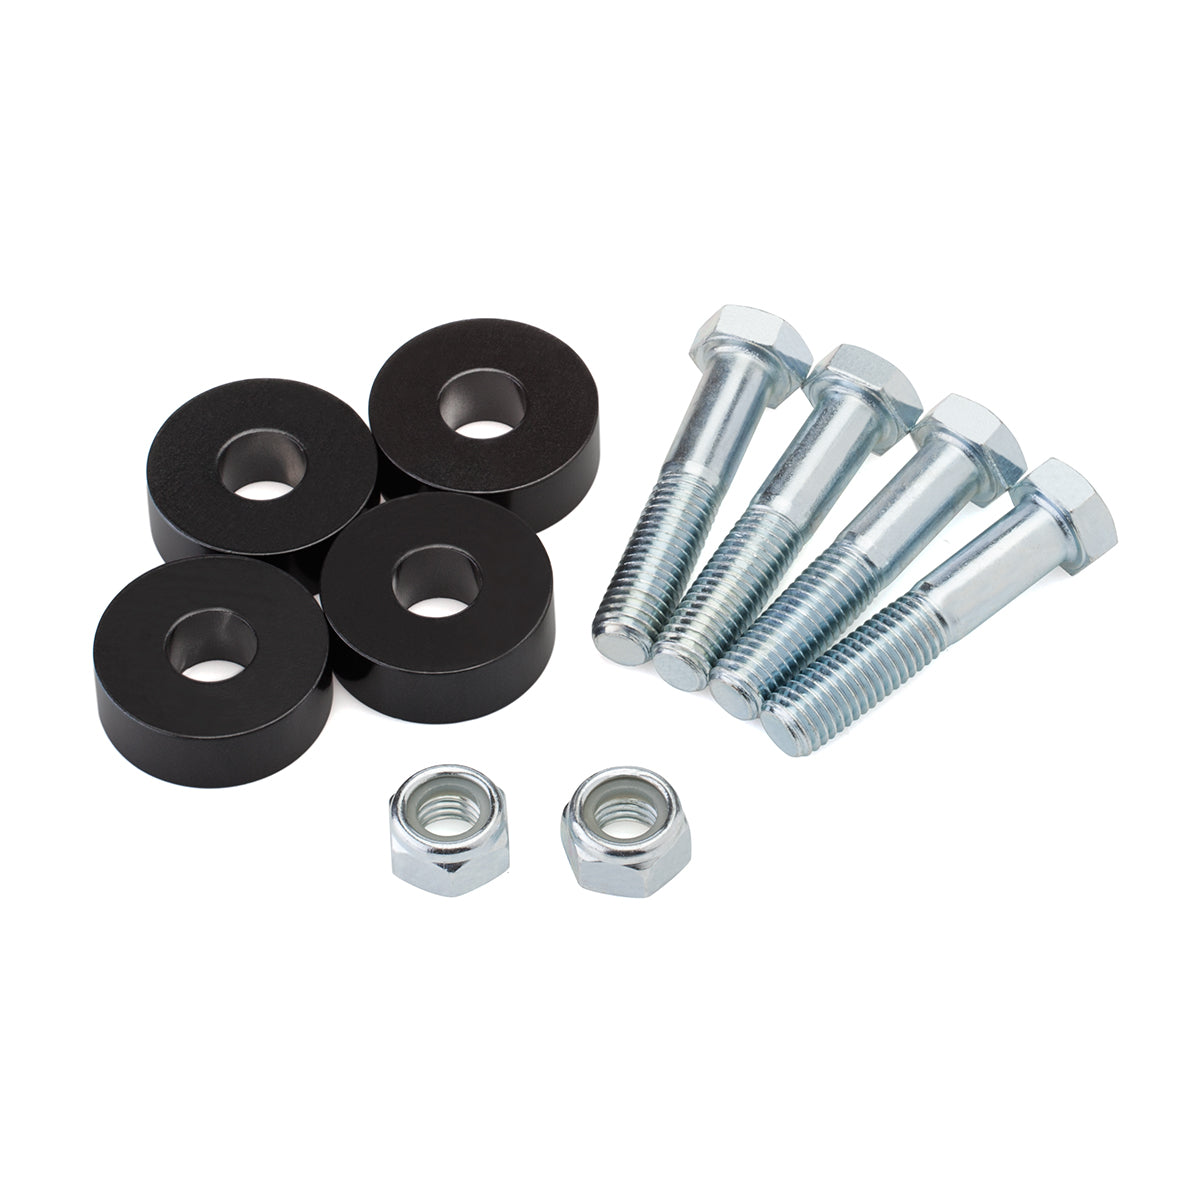 2007-2021 Chevy Silverado 1500 Full Lift Kit with Bumps Stops and Differential Drop Kit